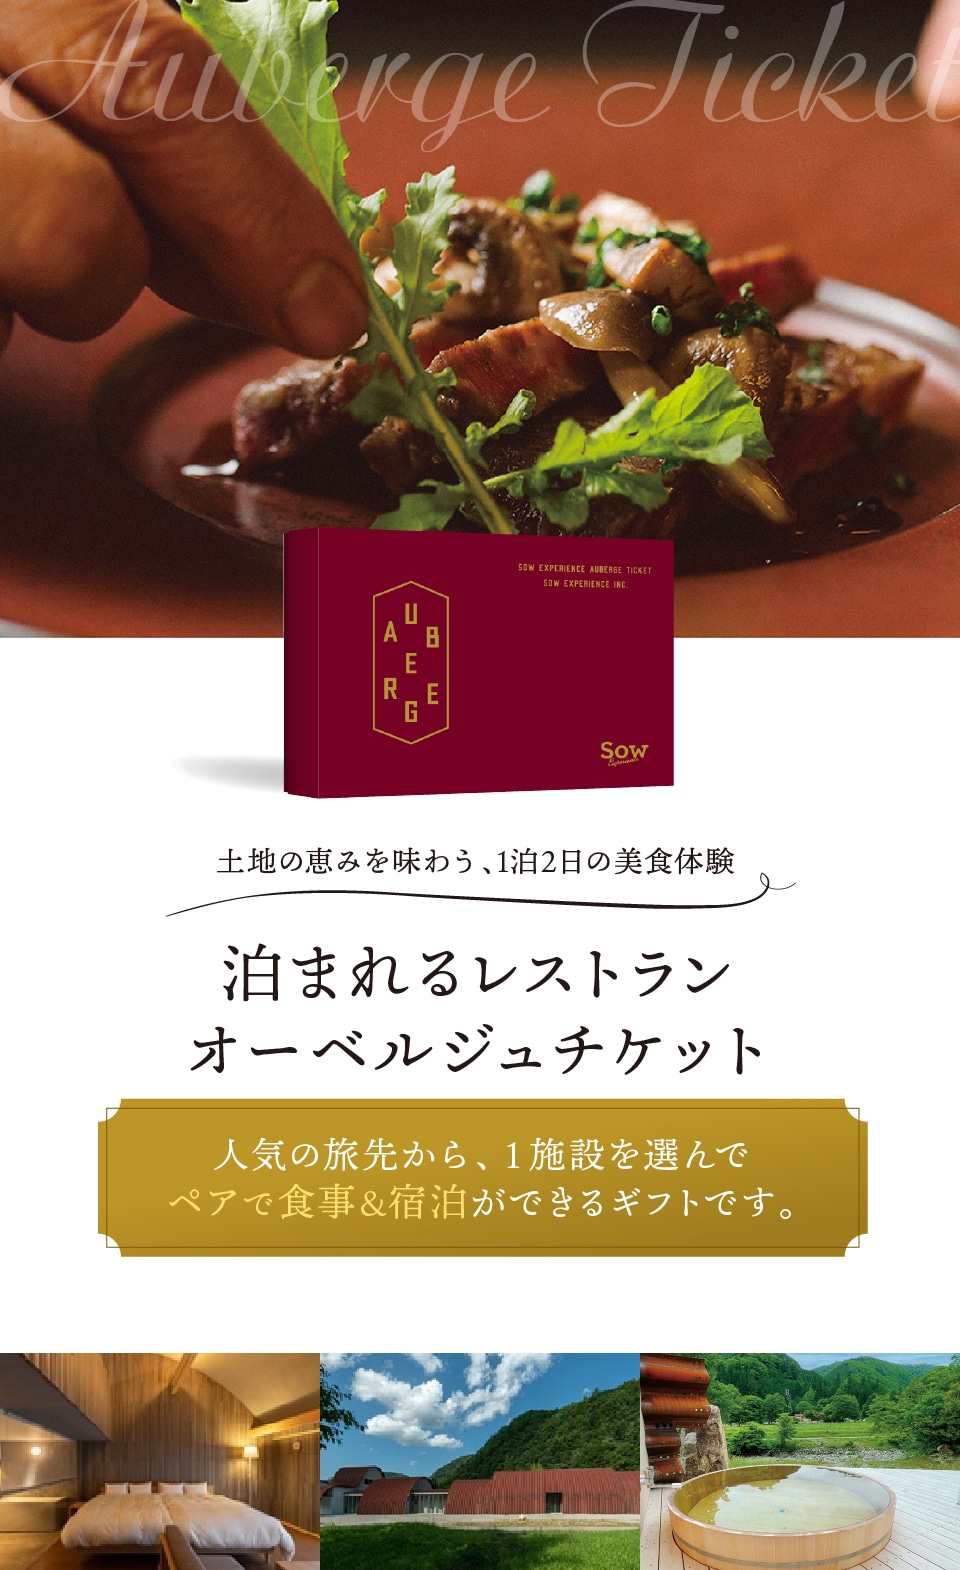 SOW EXPERIENCE 1泊2日の美食体験カタログギフト 最大64%OFFクーポン ...